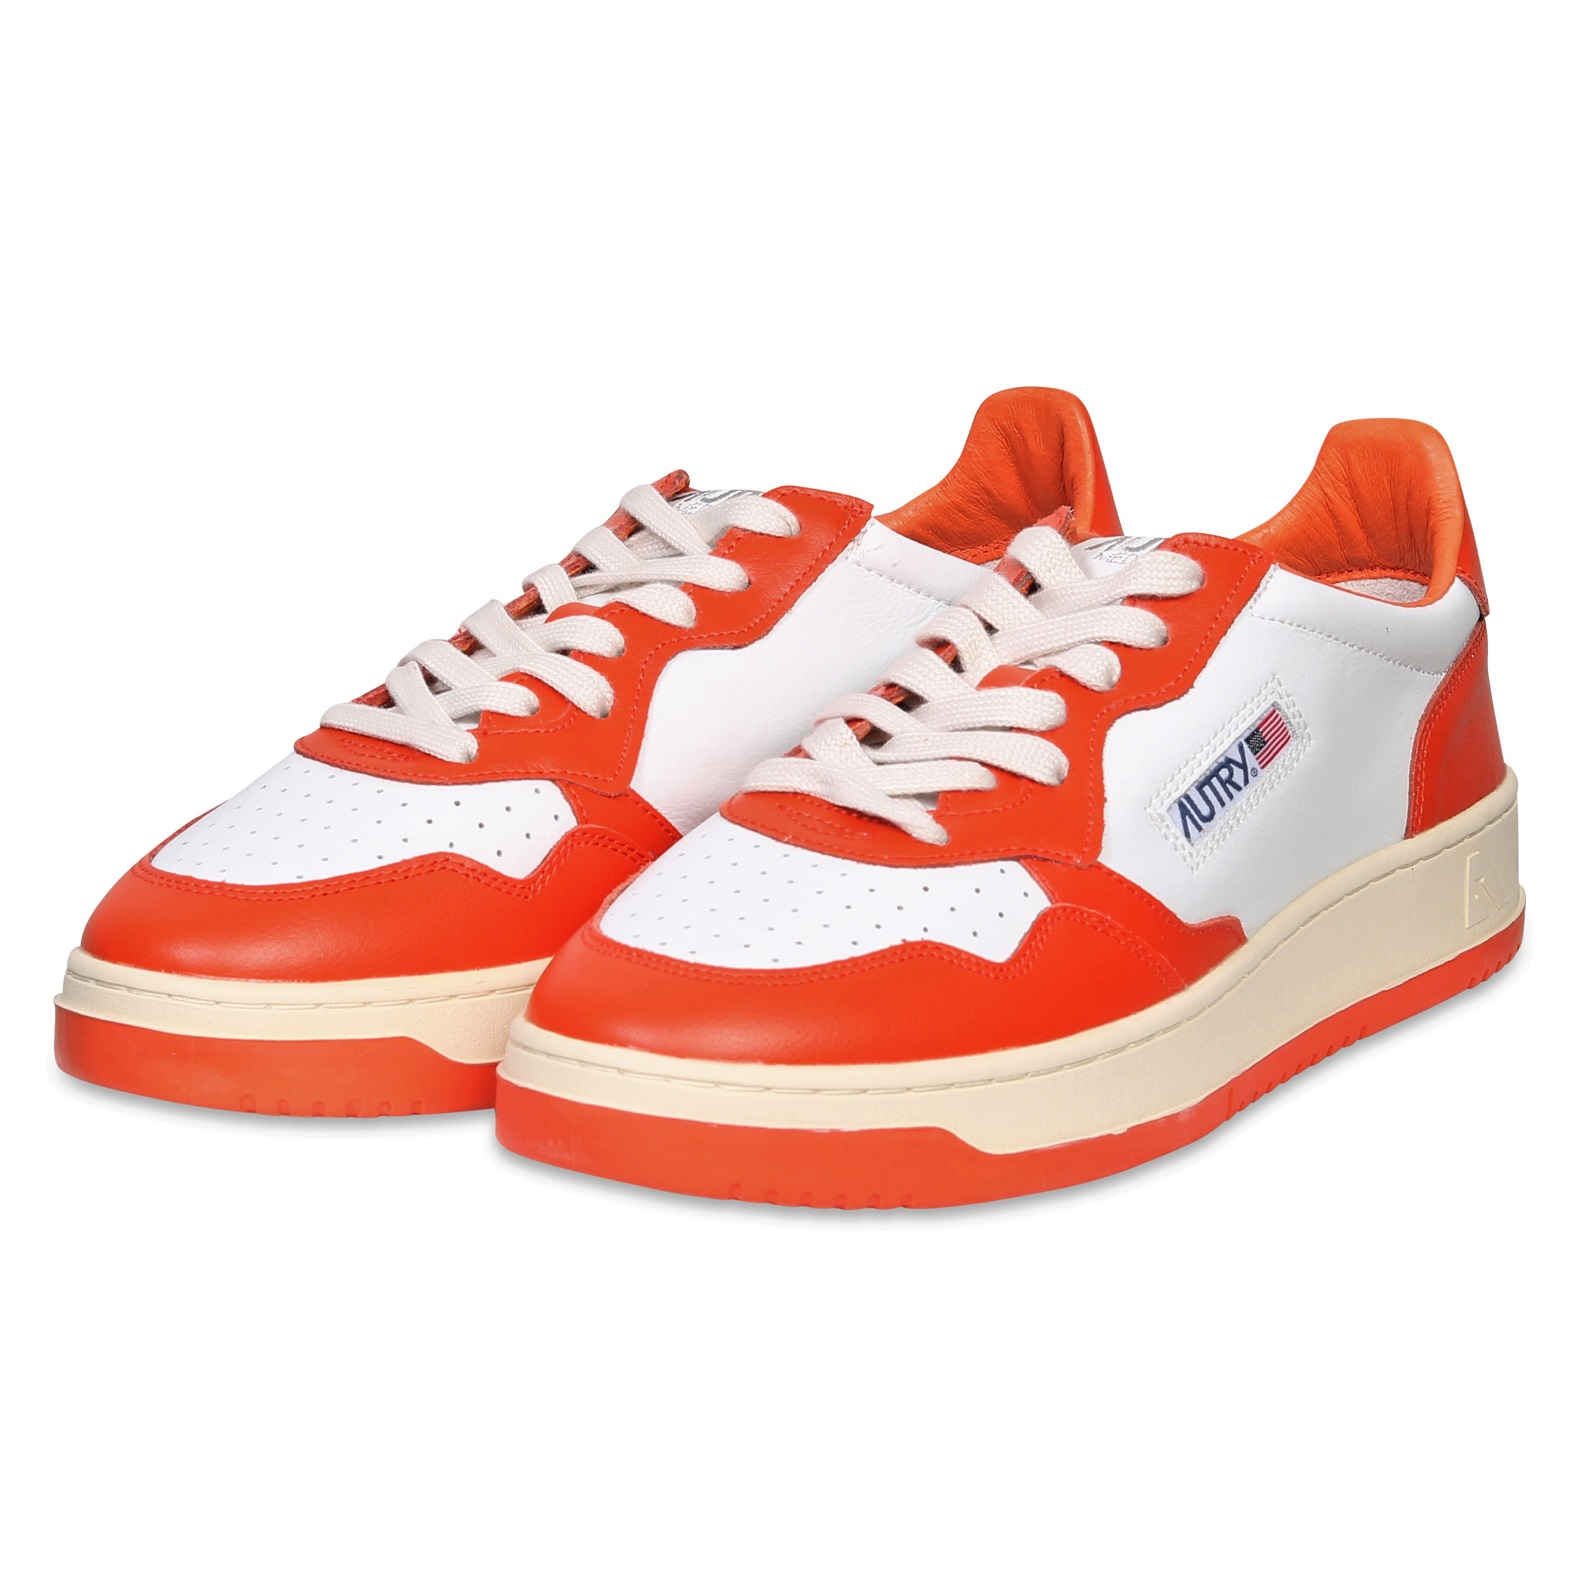 Autry Action Shoes Low Sneaker White/Tangerine 44